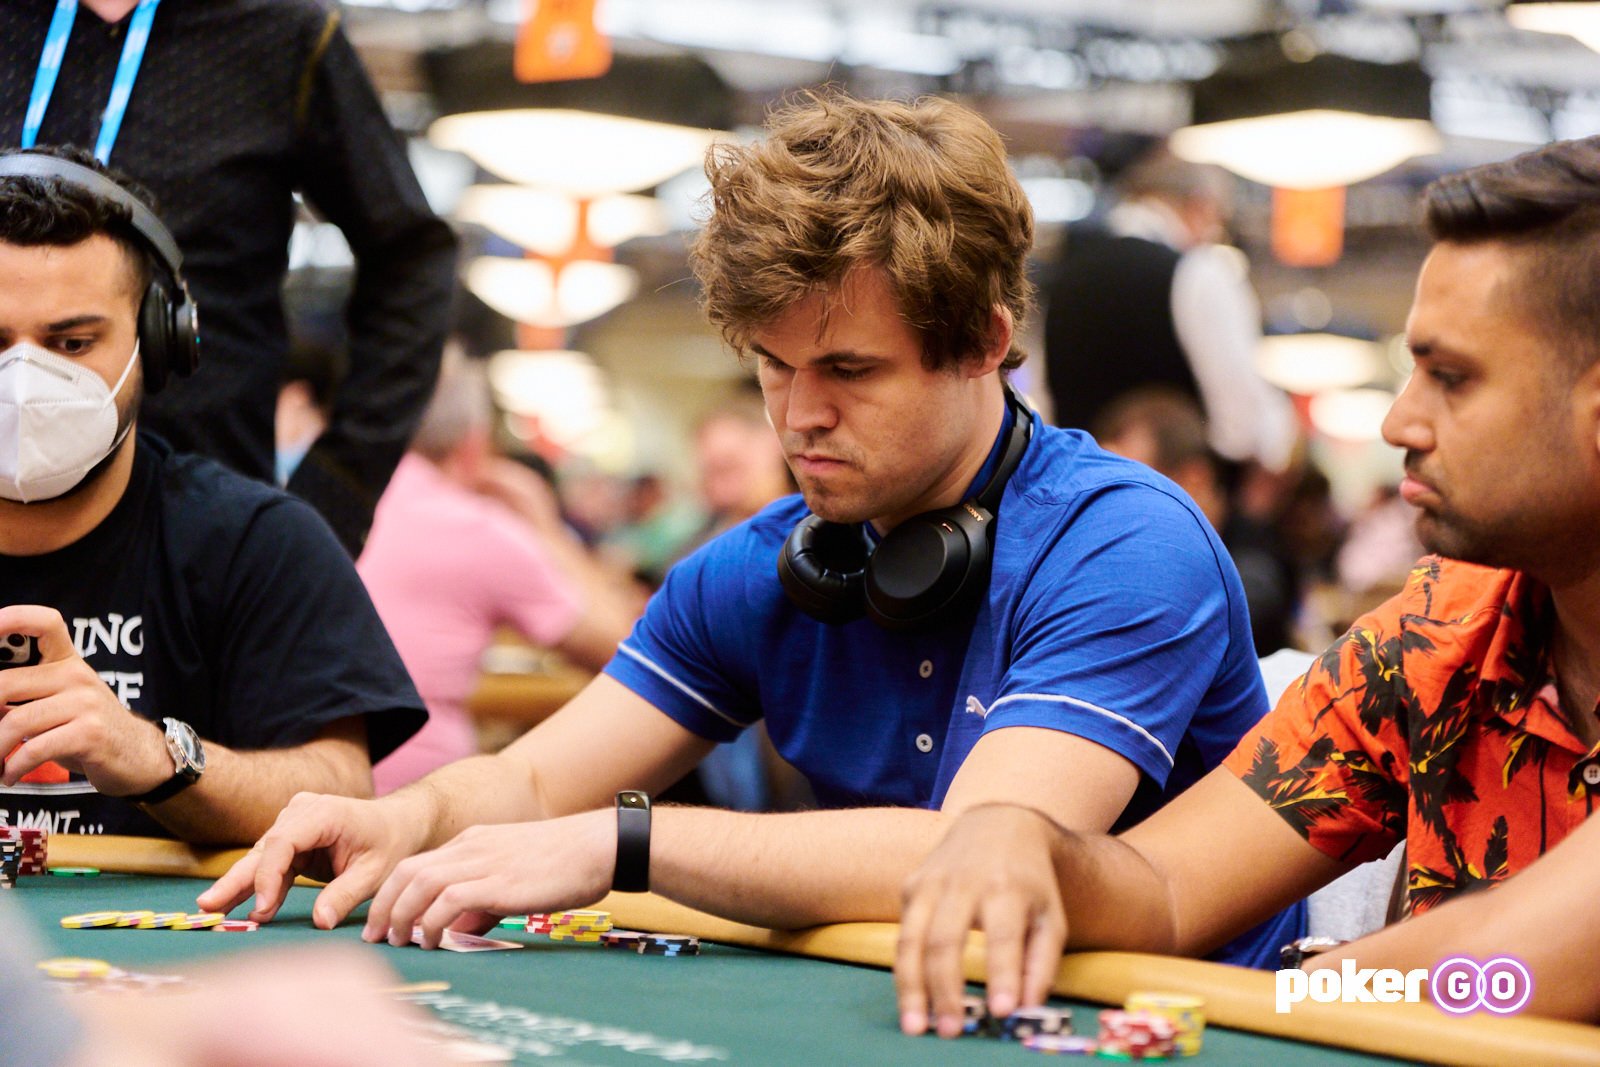 Chess Champ Cashes In Checks for Poker Chips 